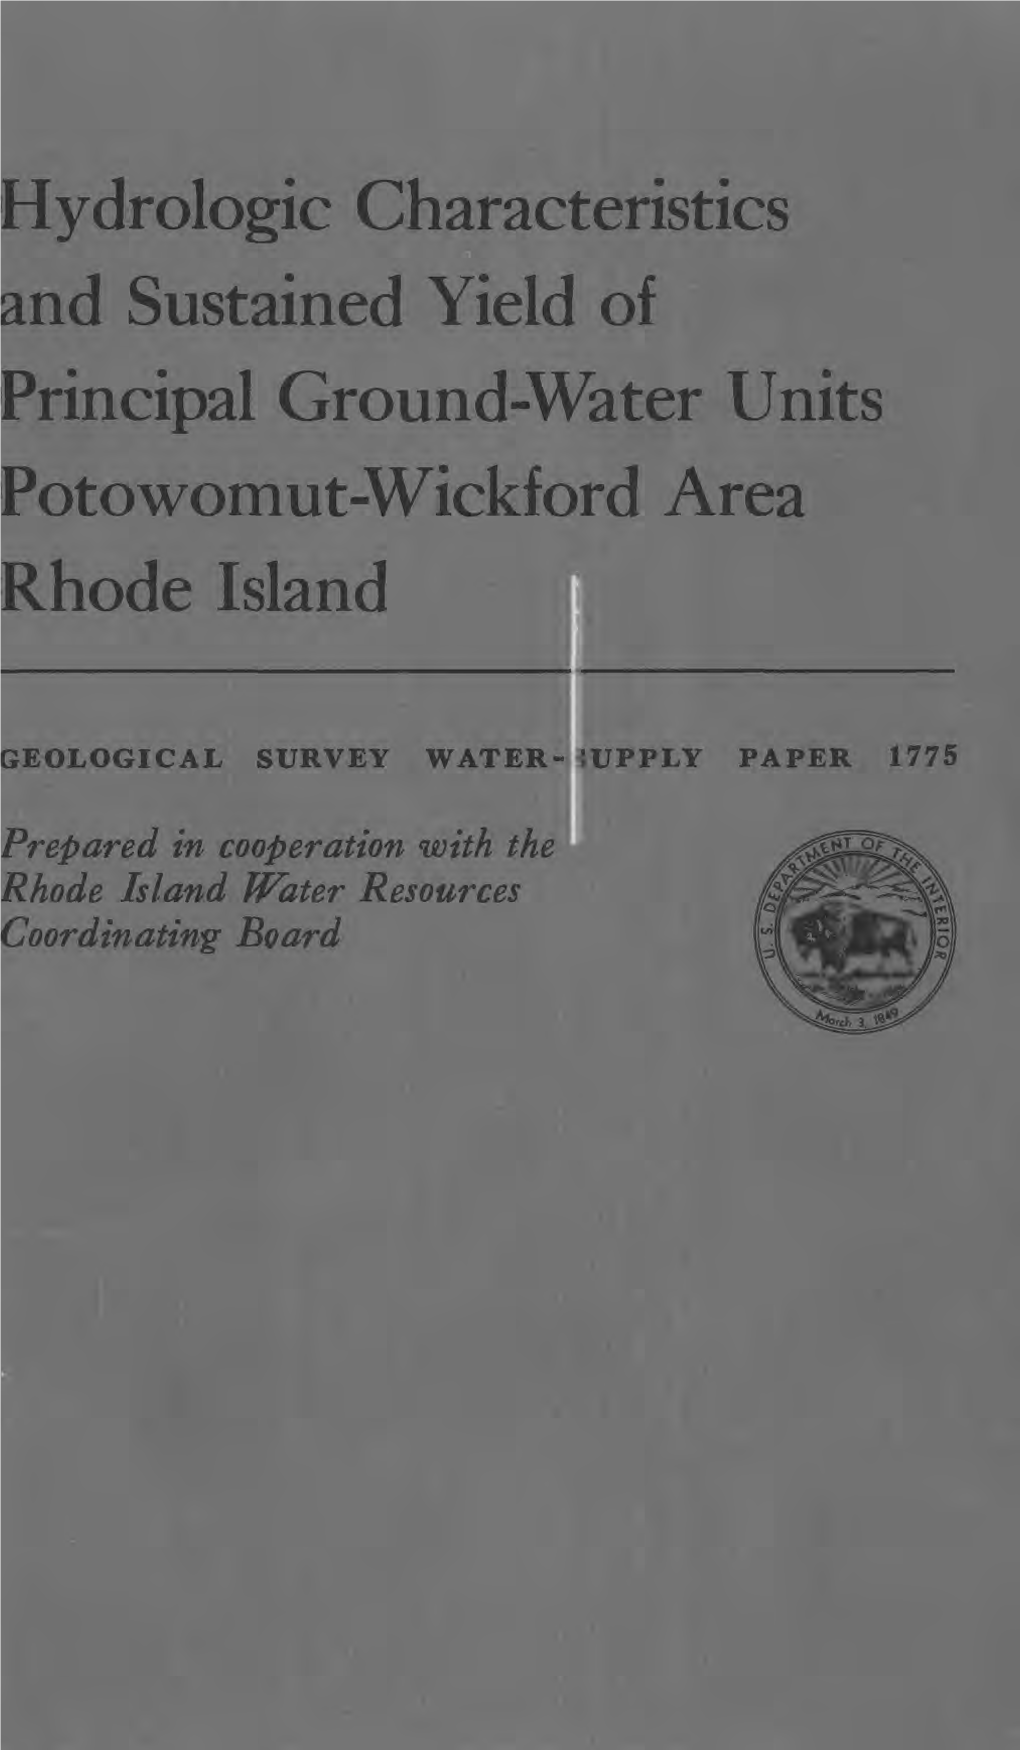 Hydrologic Characteristics and Sustained Yield of Principal Ground-Water Units Potowomut-Wickford Area Rhode Island